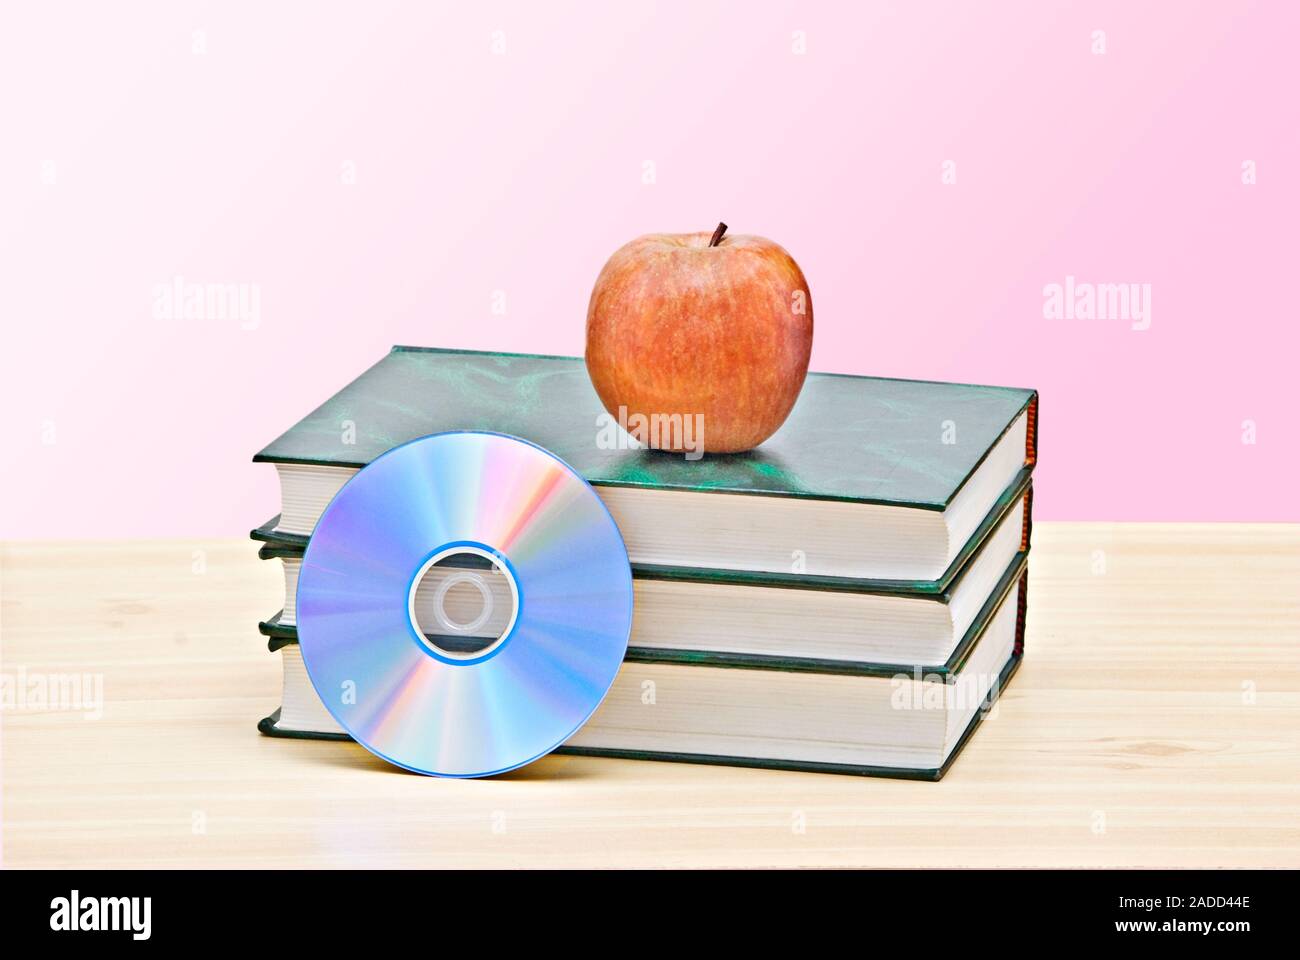 Apple, dvd, and books as a symbol of transition from old to new ways of learning Stock Photo